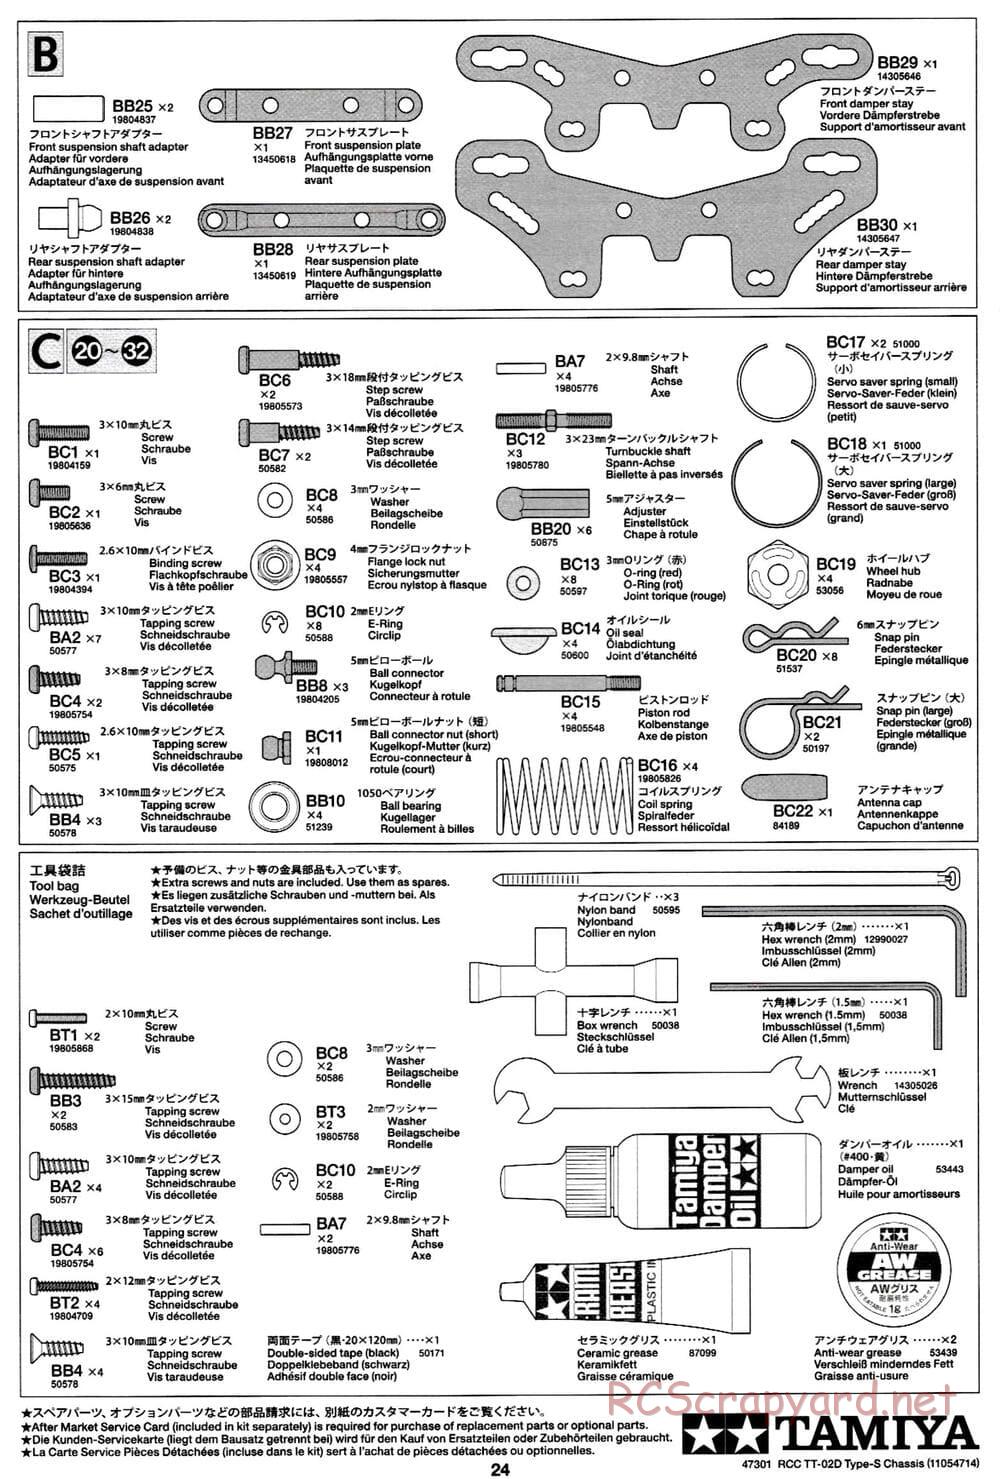 Tamiya - TT-02D Type-S Chassis - Manual - Page 24